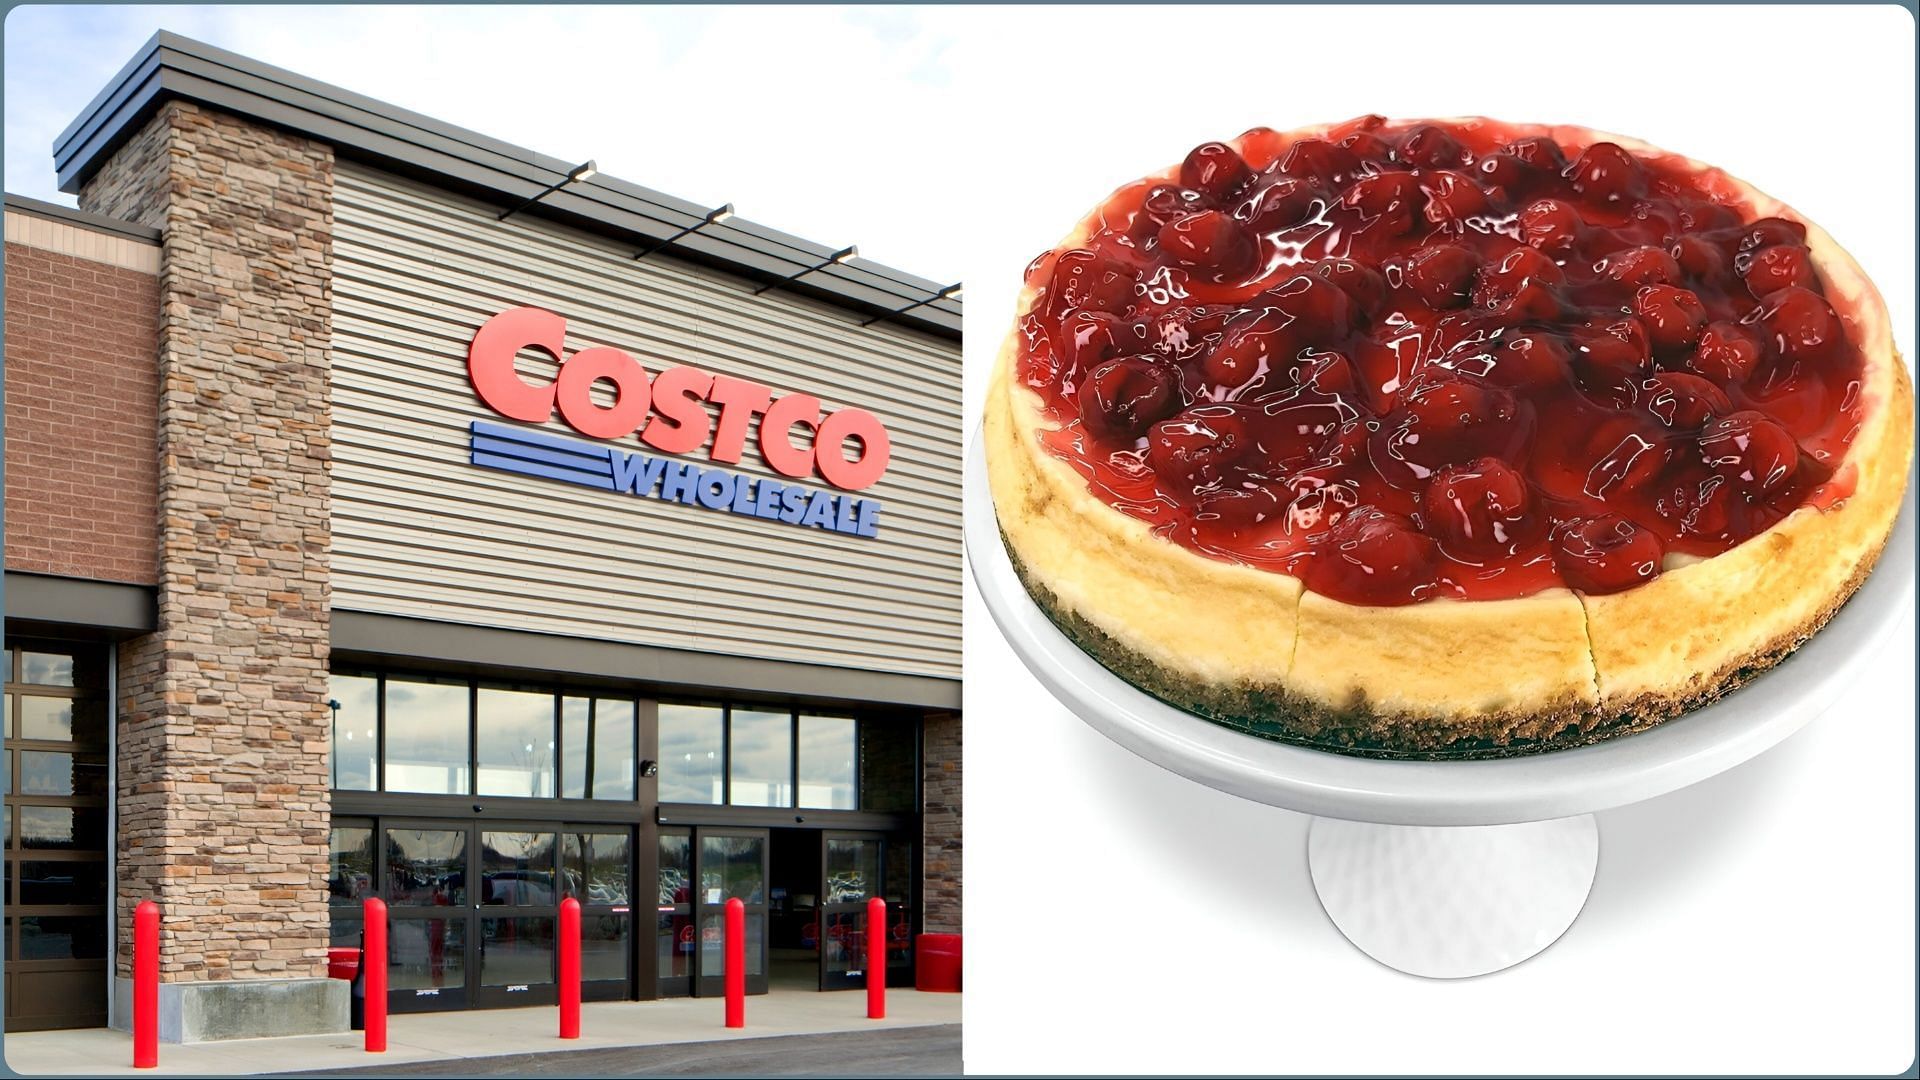 Costco adds a Cherry Topped Cheesecake in the dessert section (Image via Costco / Walmart)